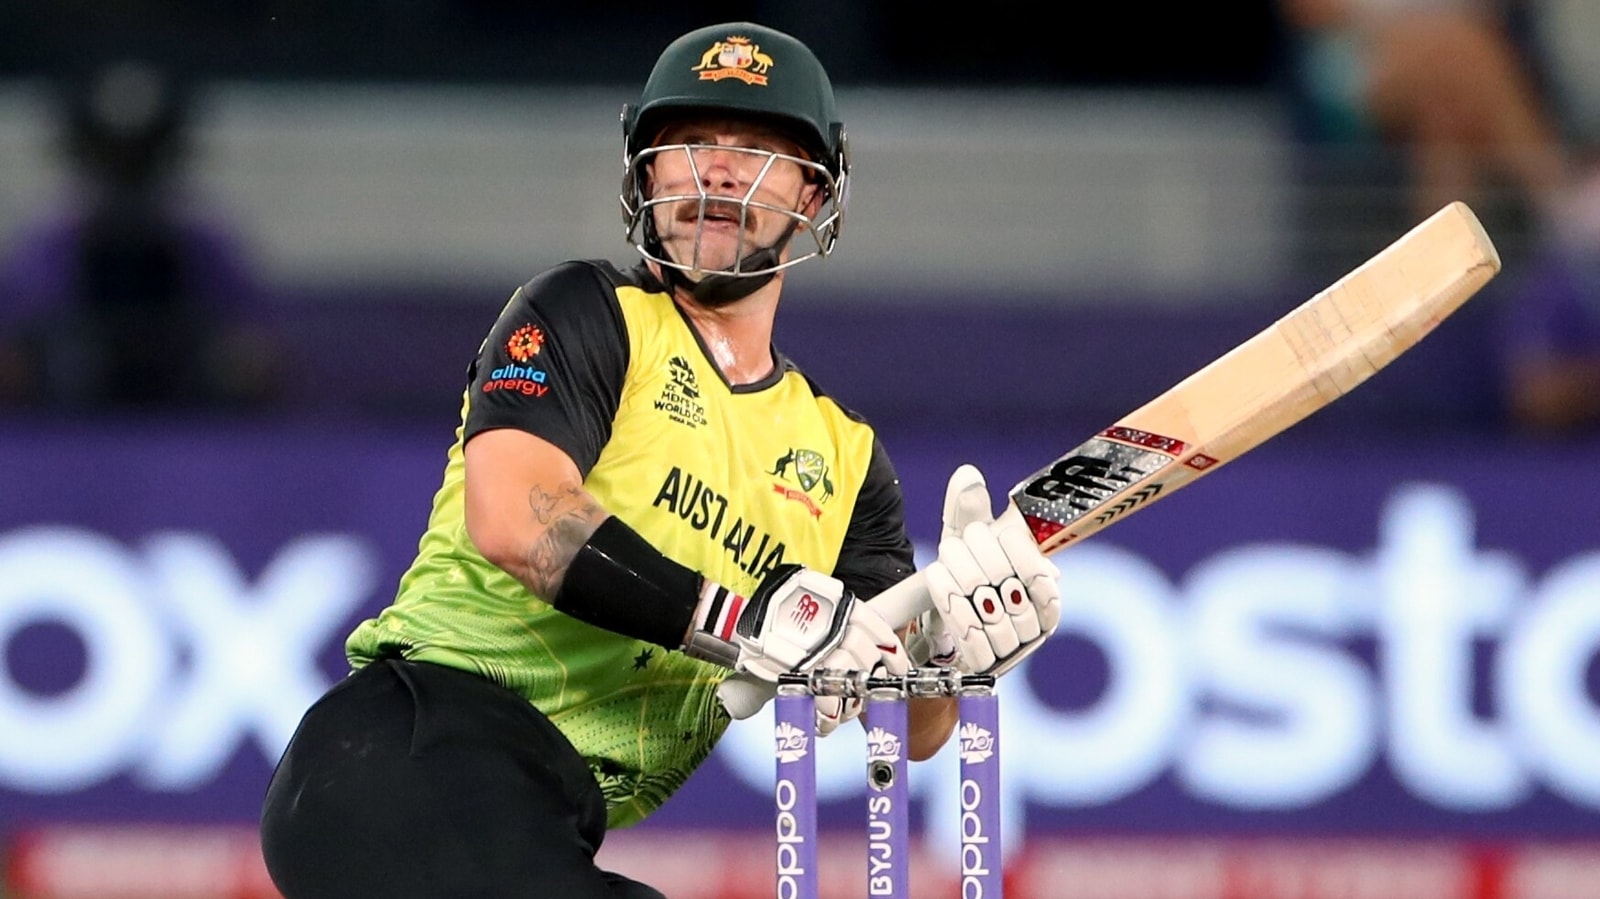 IPL 2022 Auction: From Kedar Jadhav to Matthew Wade, 5 players who might have overpriced themselves - Check full list